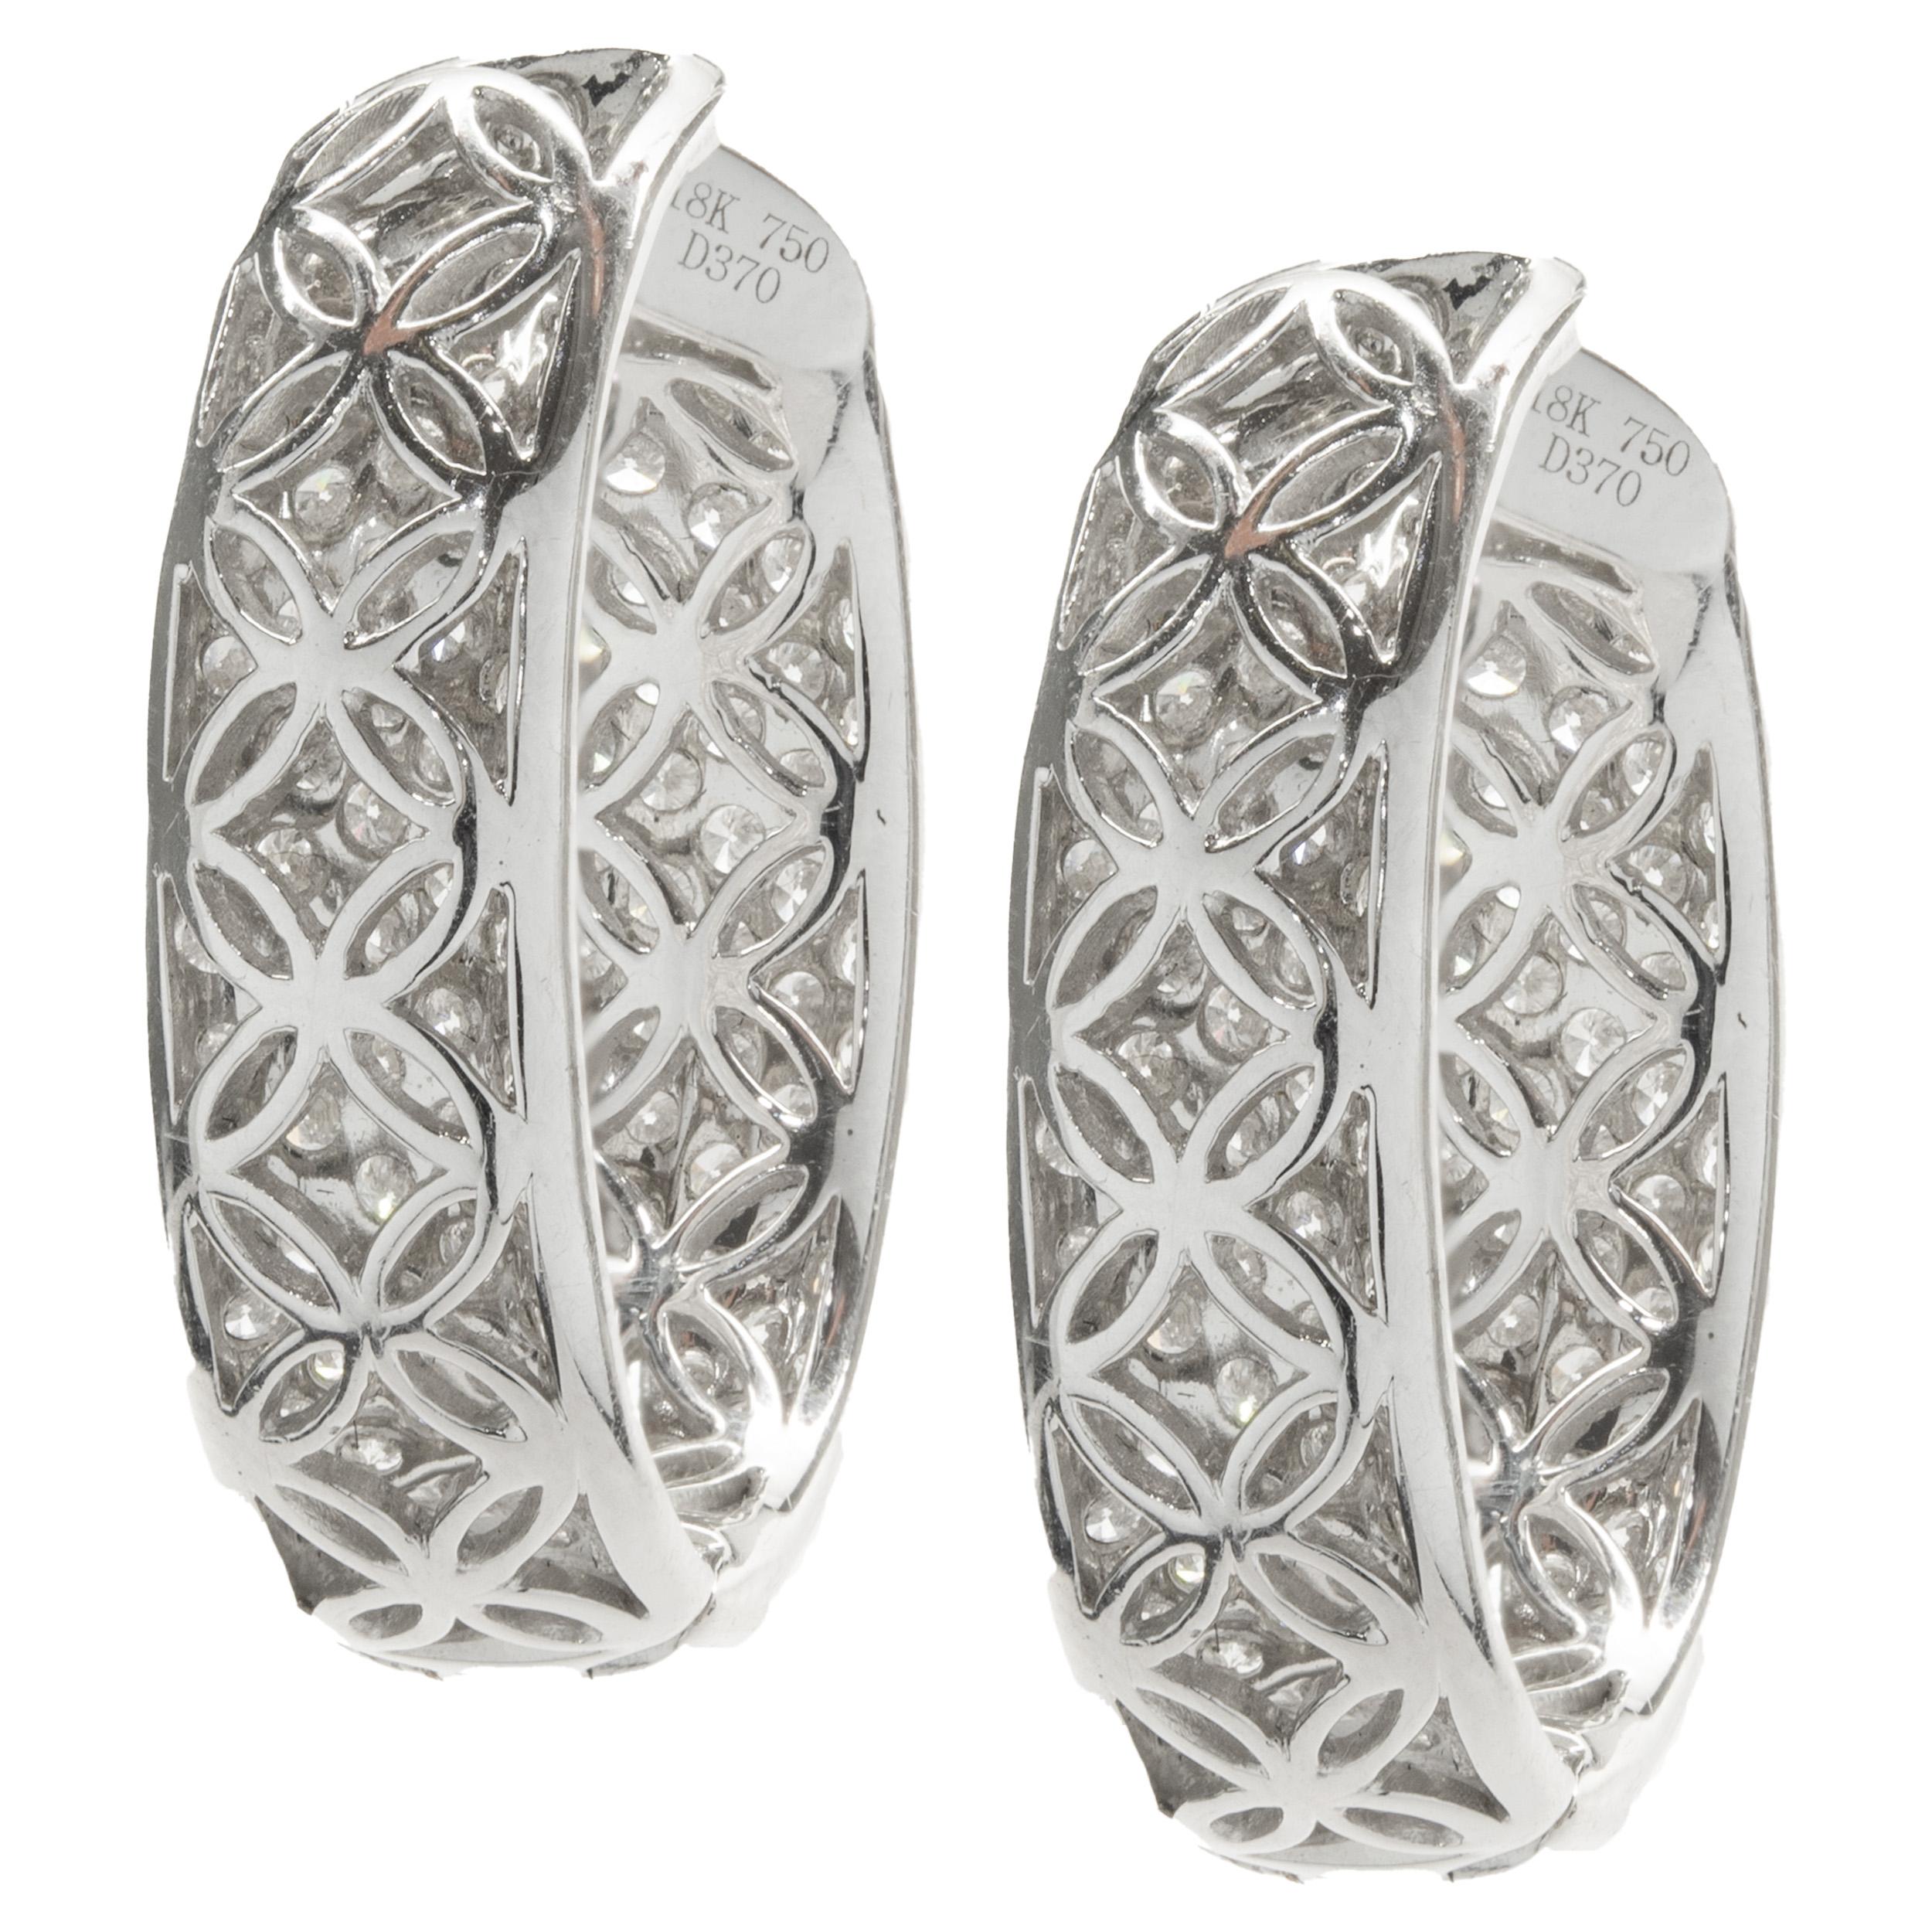 Designer: custom
Material: 18K white gold
Diamonds: 260 round brilliant cut = 3.70cttw
Color: G
Clarity: VS1
Dimensions: earrings measure 25.9 X 7.01mm
Weight: 11.13 grams